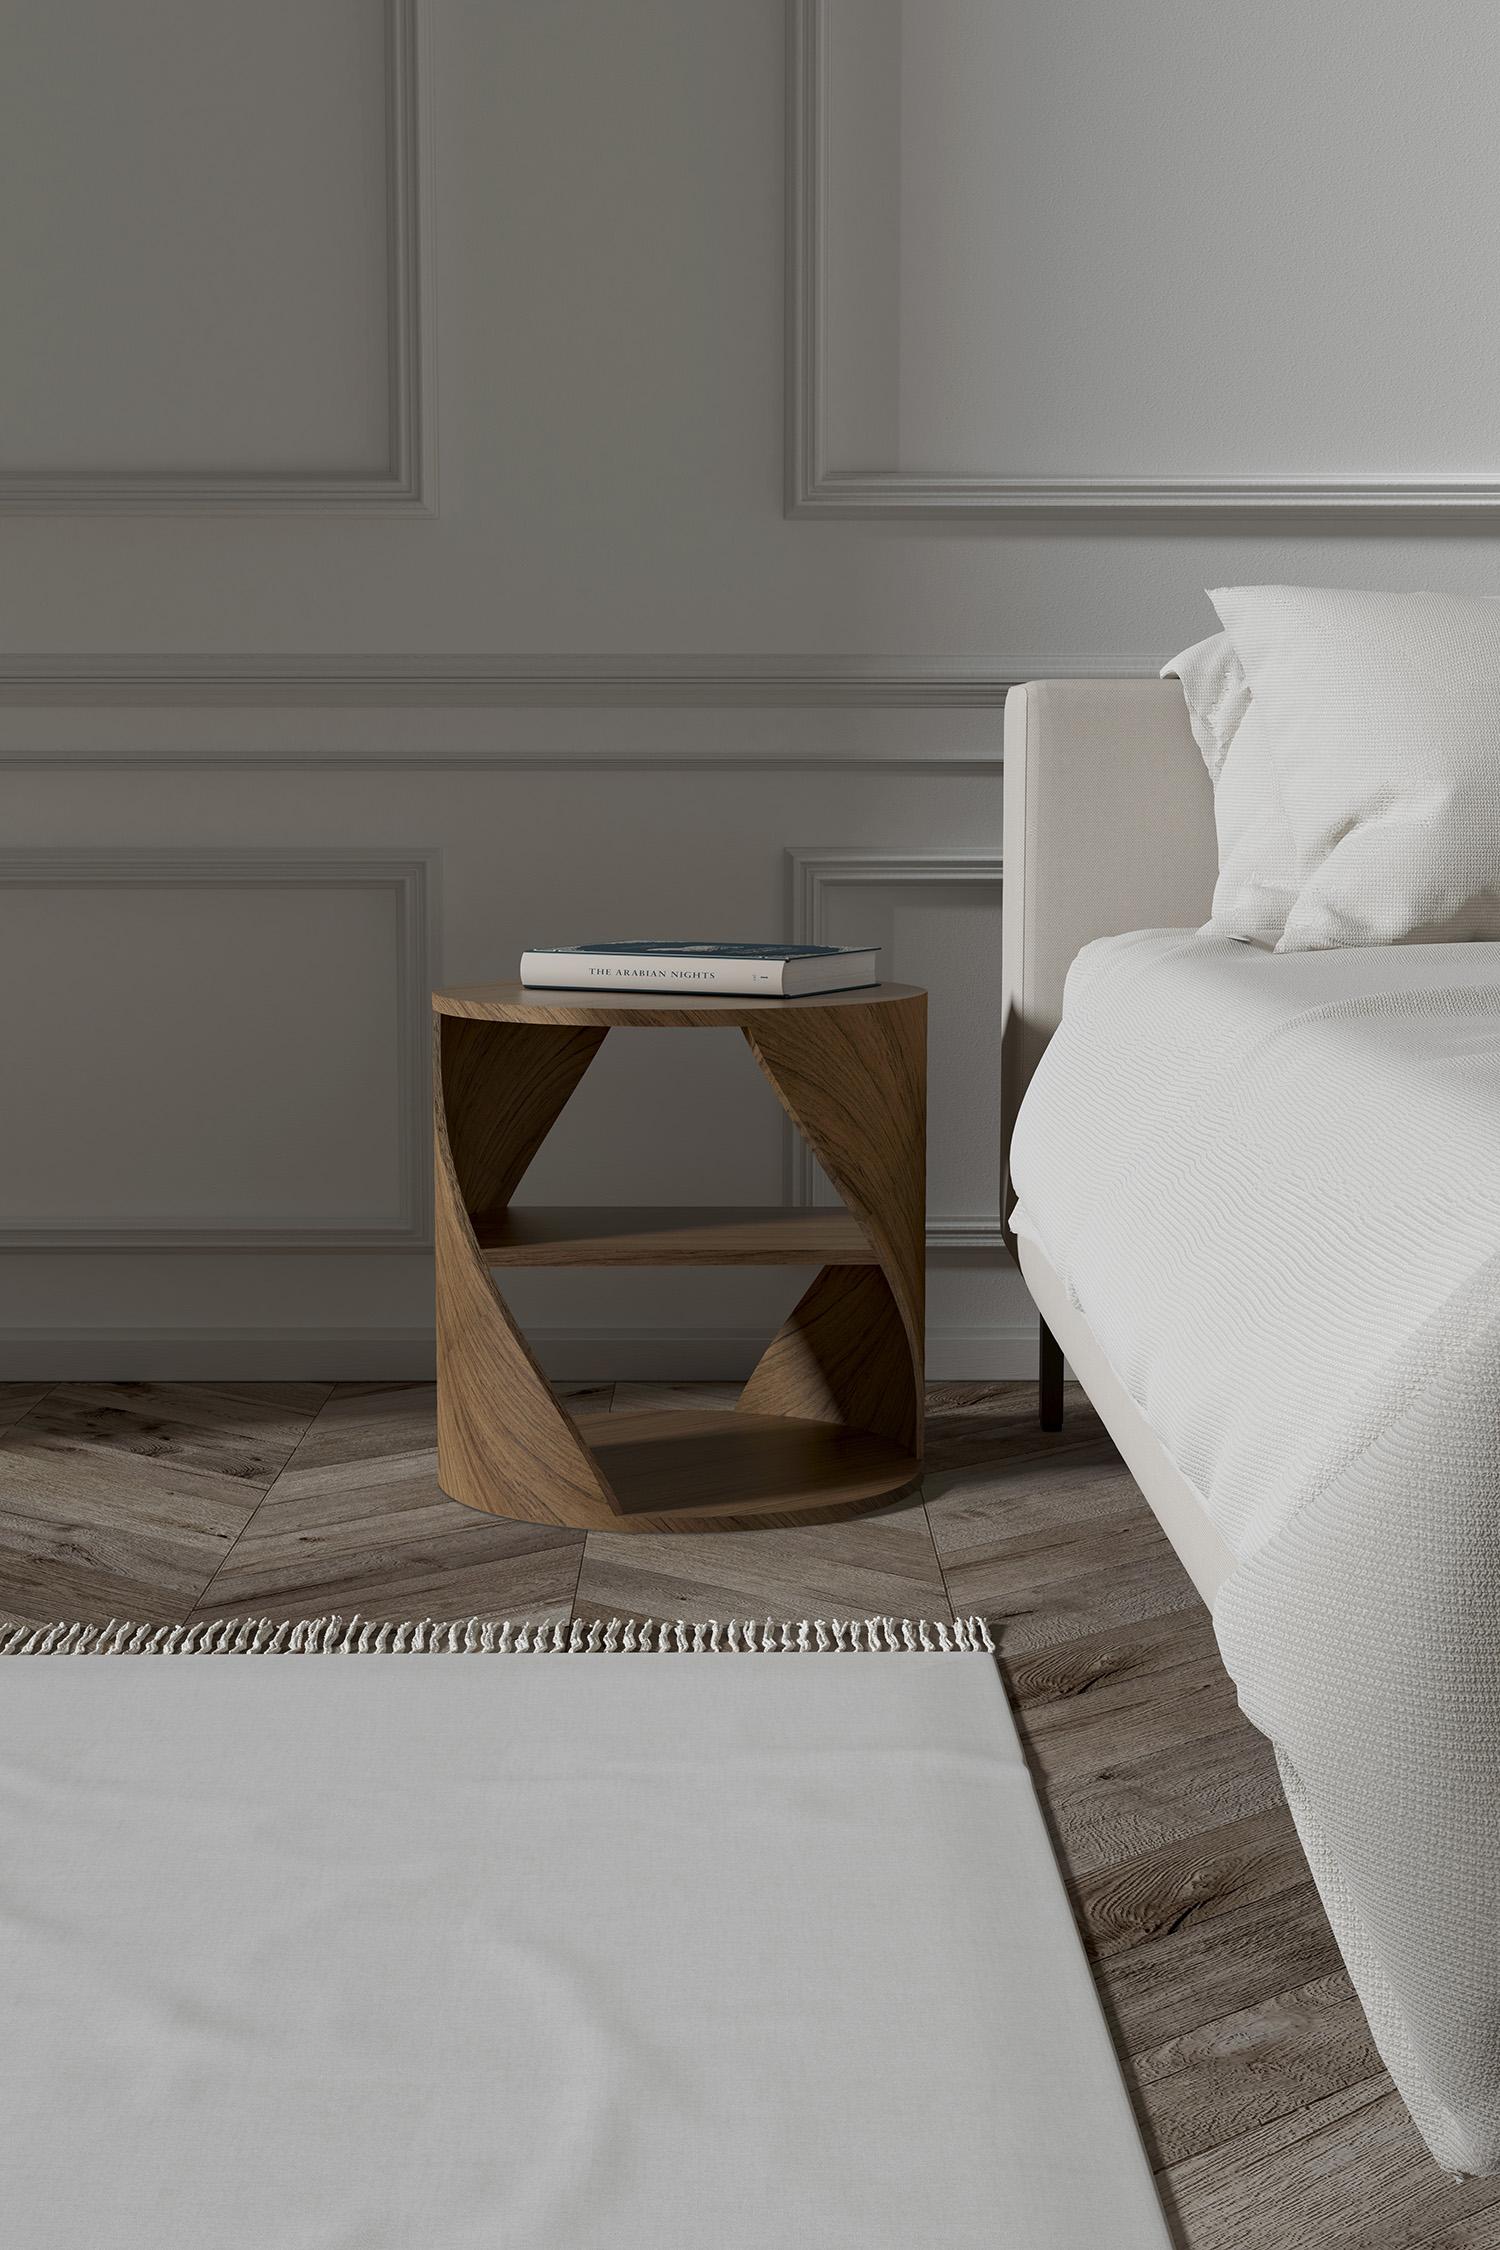 Set of two walnut decorative nightstand, MYDNA side tables by Joel Escalona

MYDNA is a chic and contemporary storage system inspired by the DNA concept: both by its sophisticated double helix shape, and by the metaphorical statement that everything